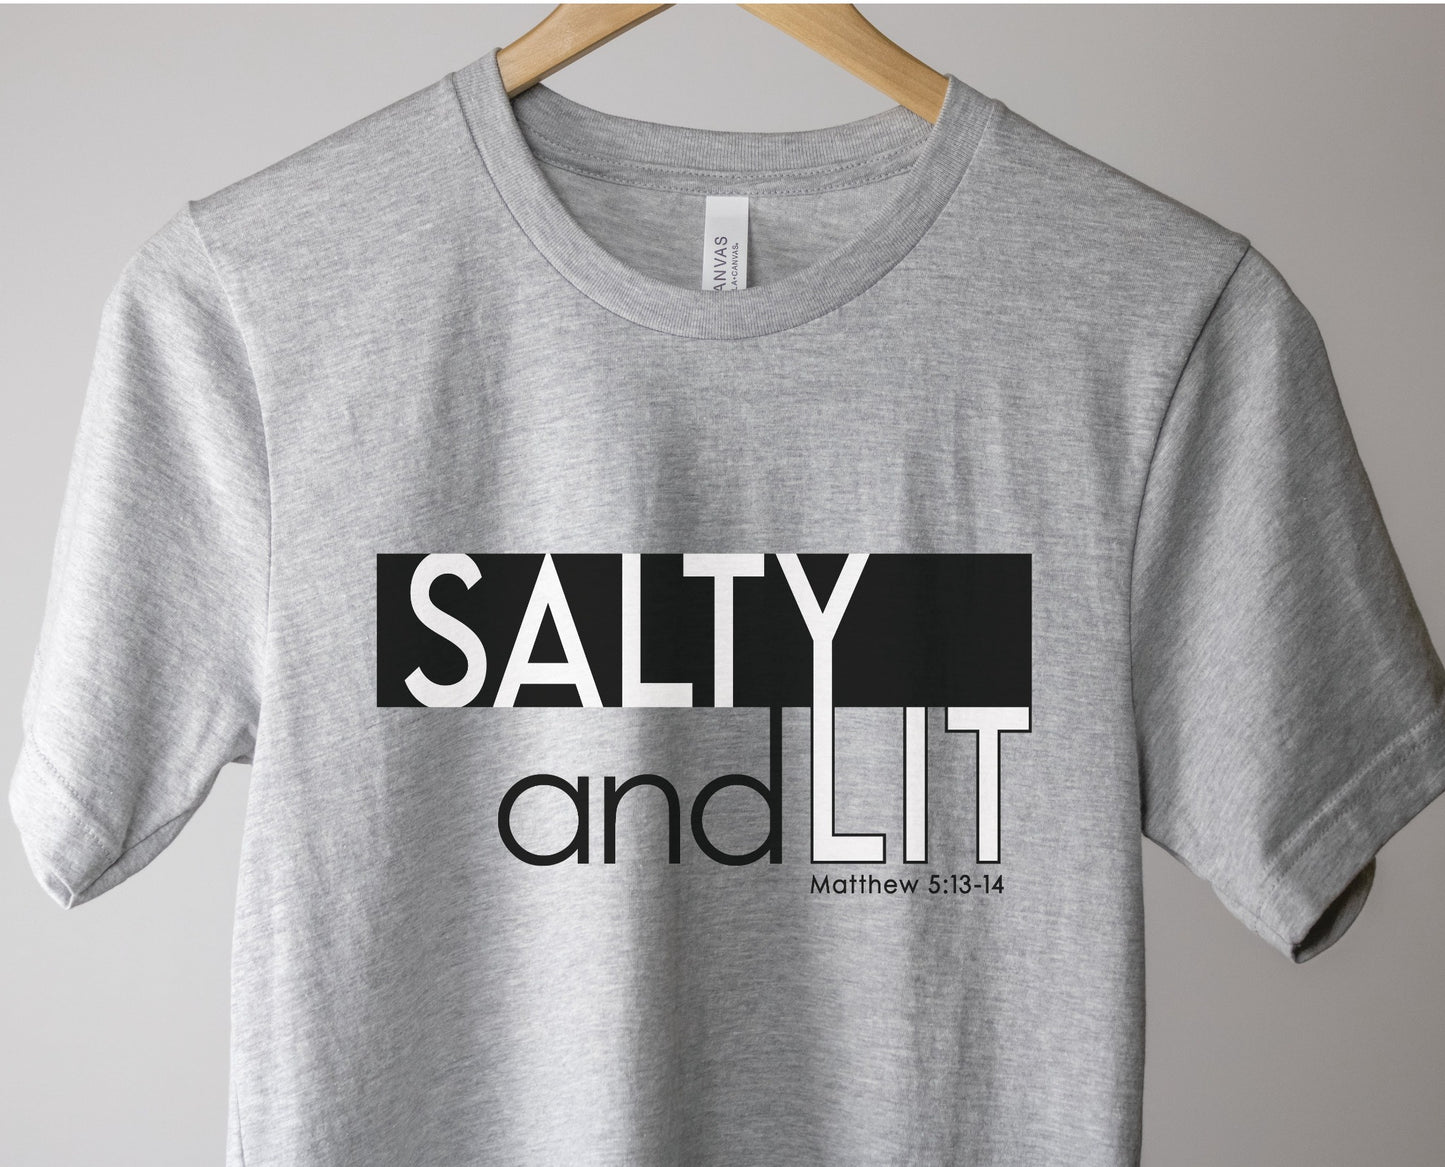 Funny Christian Salty And Lit Matthew 5:13-14 bible verse printed on soft unisex heather gray t-shirt for Men